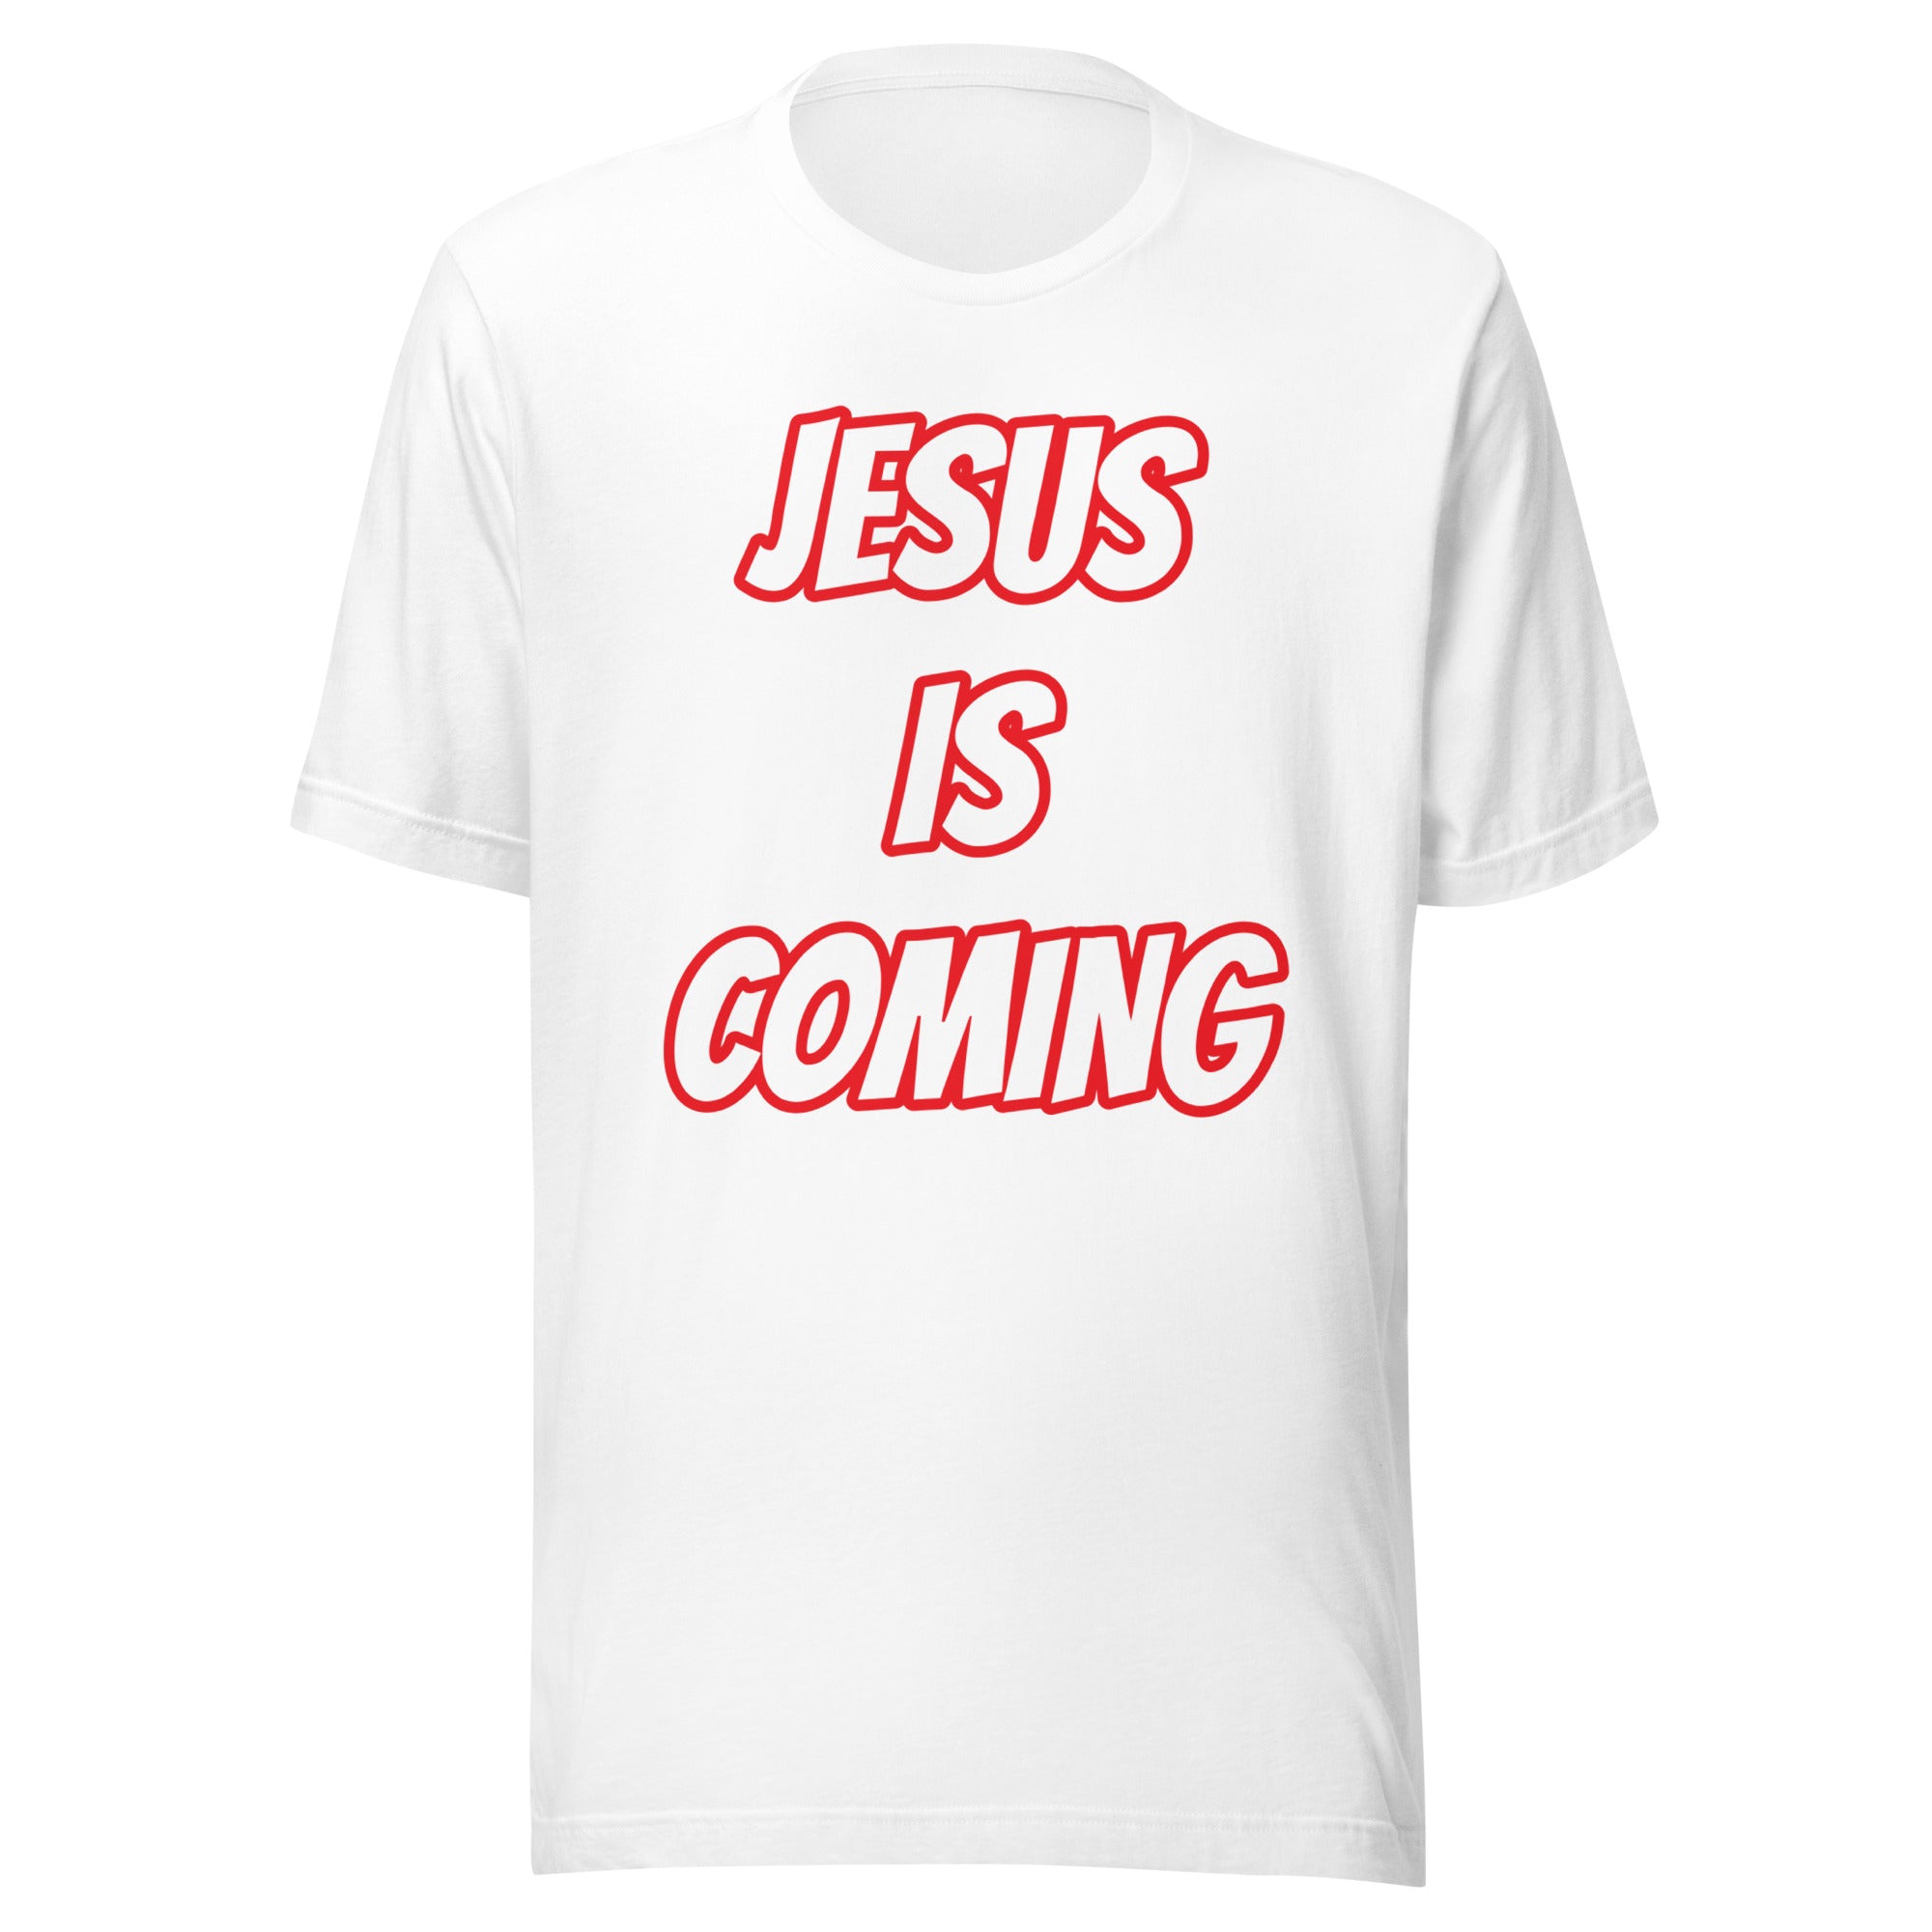 JESUS IS COMING BLACK/RED Unisex t-shirt